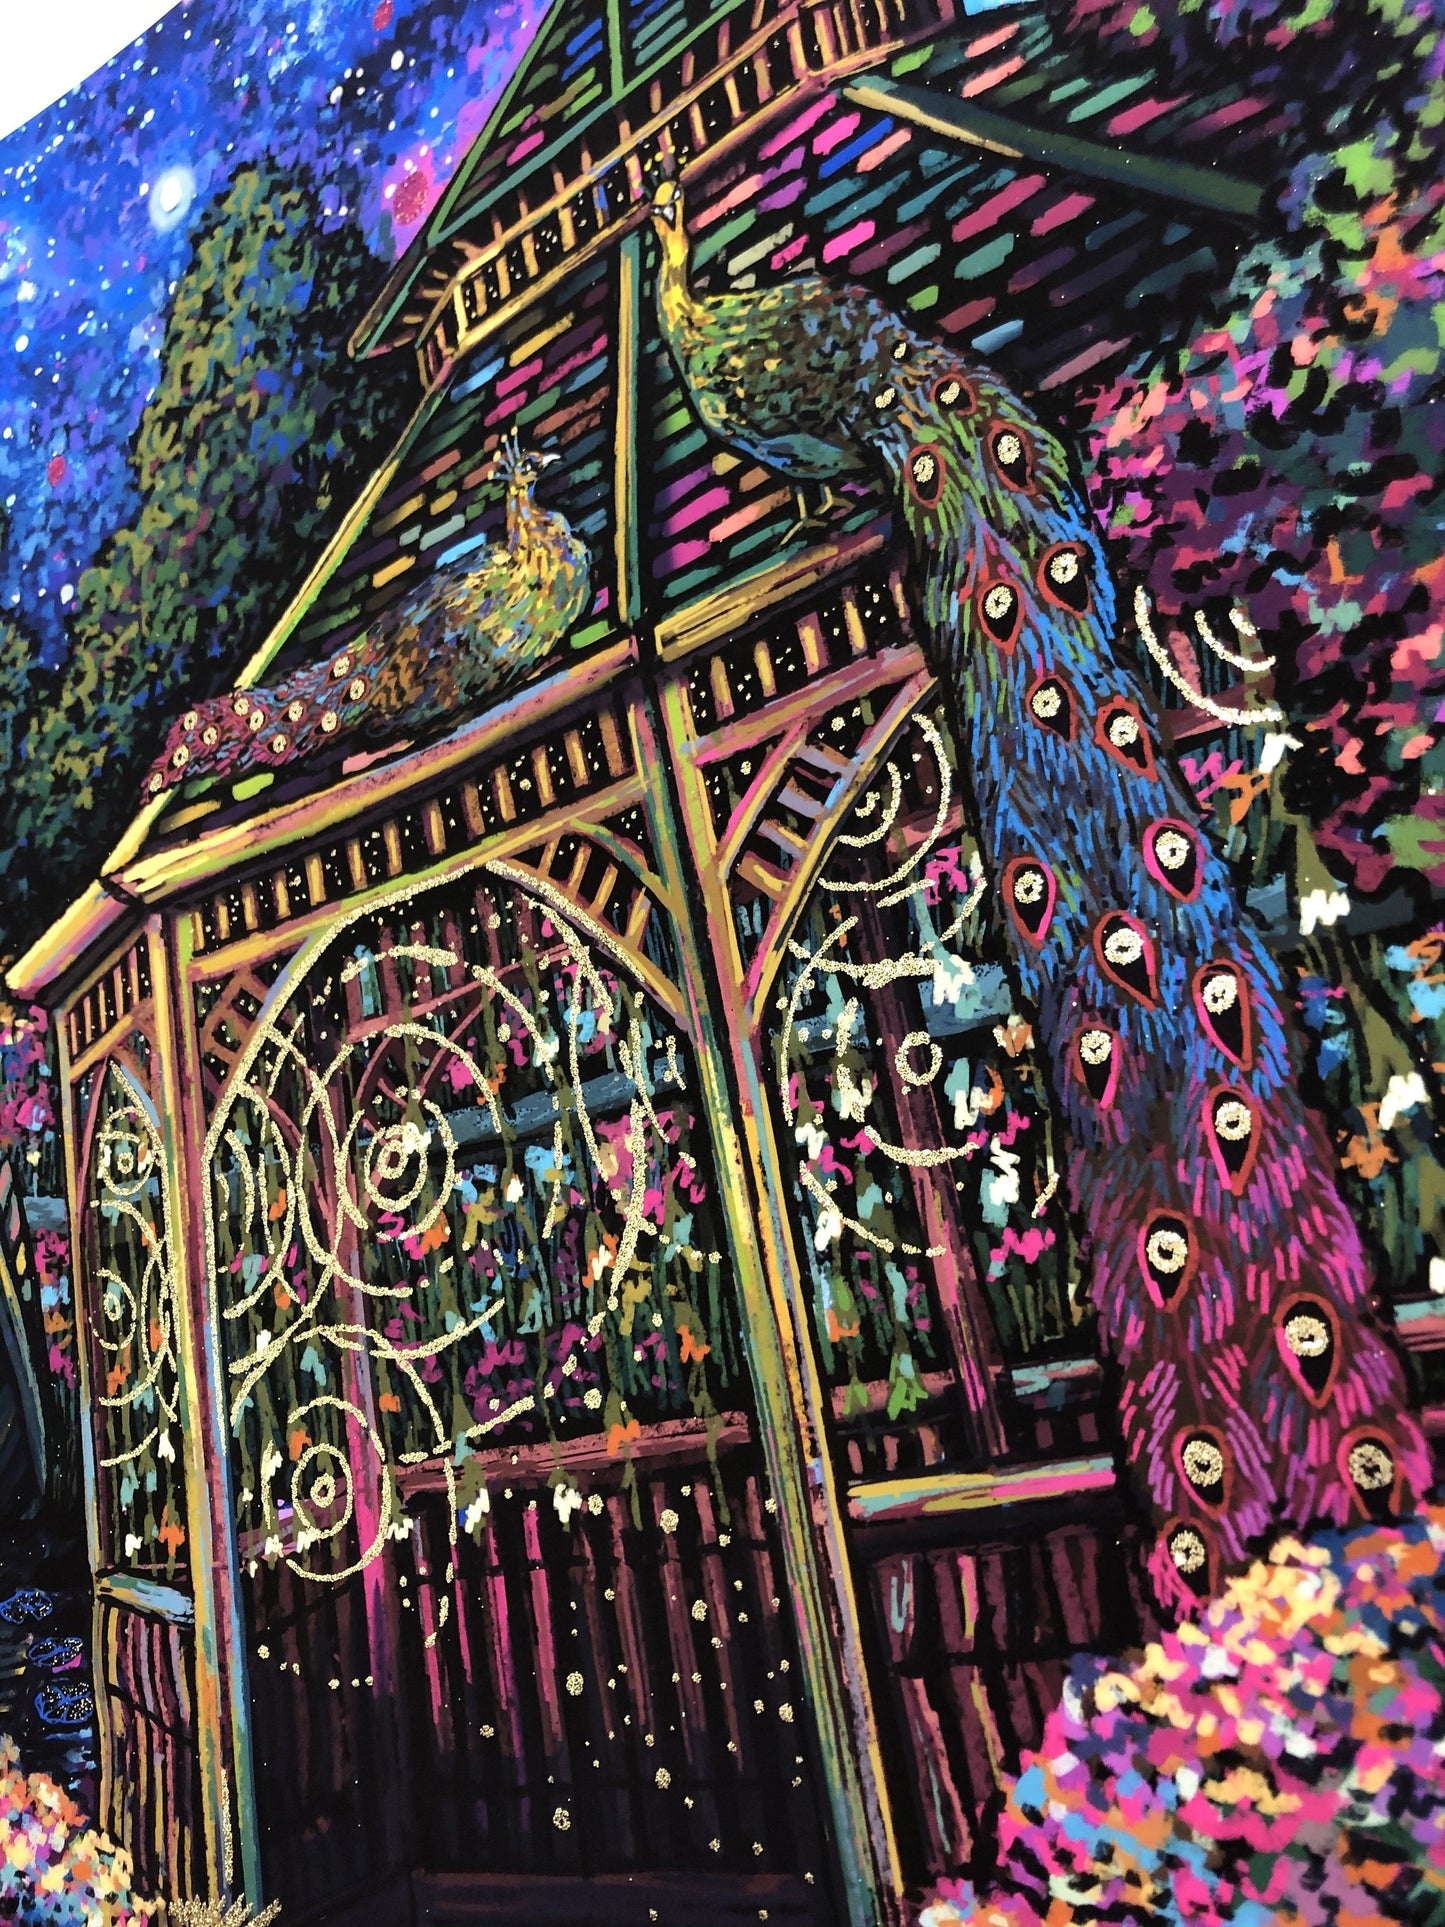 The Telling Hour (Limited Edition of 144) Print James R. Eads